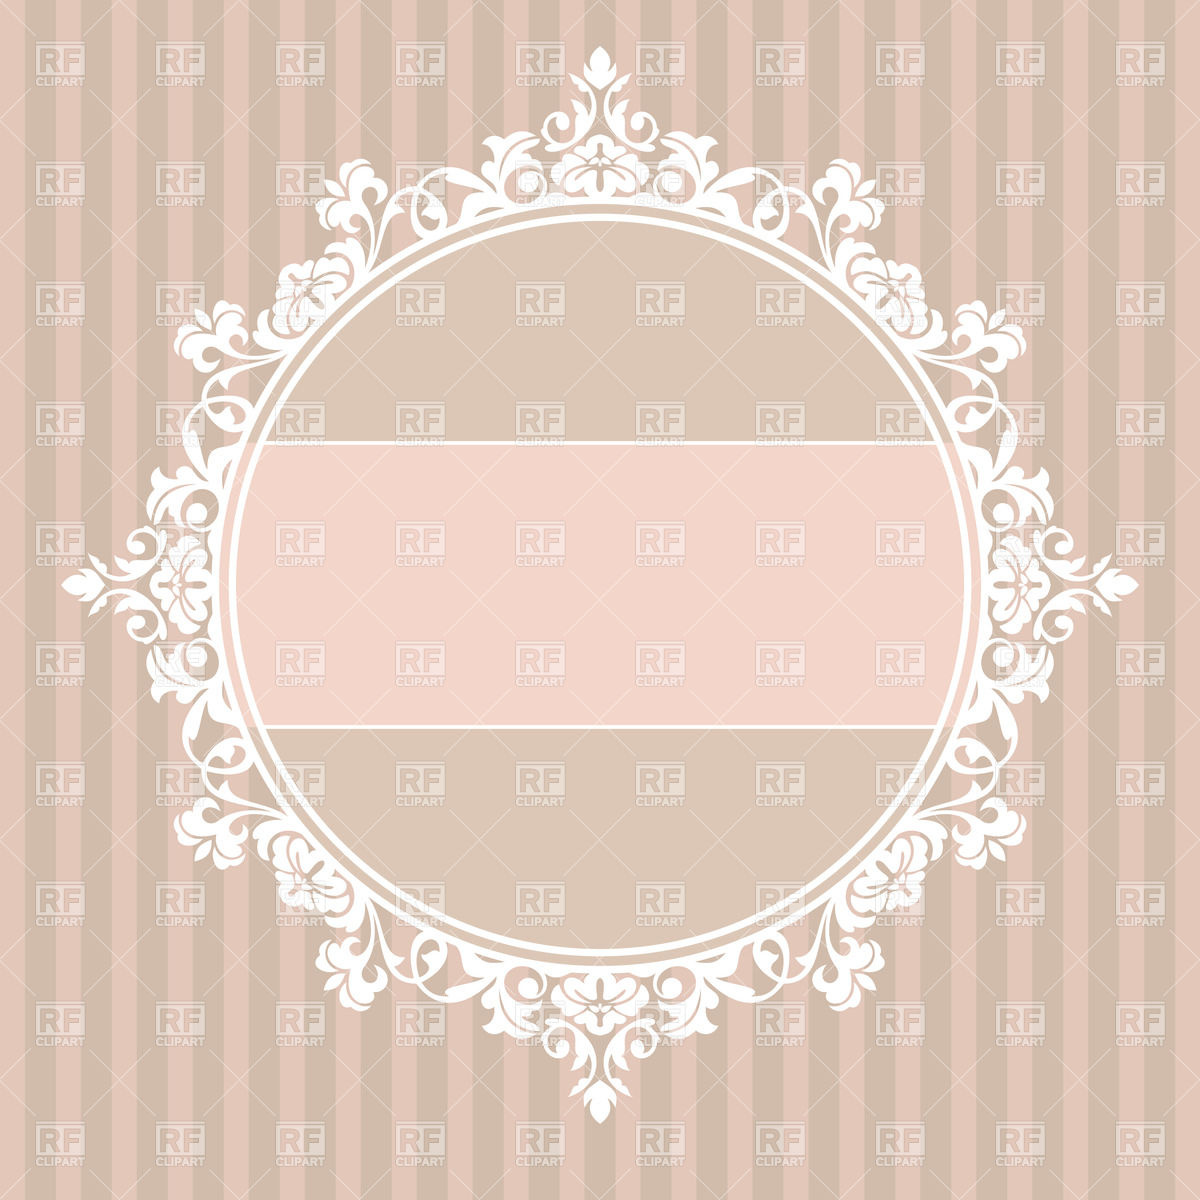 Vintage Frame With Lace Edging On Striped Background 37238 Download